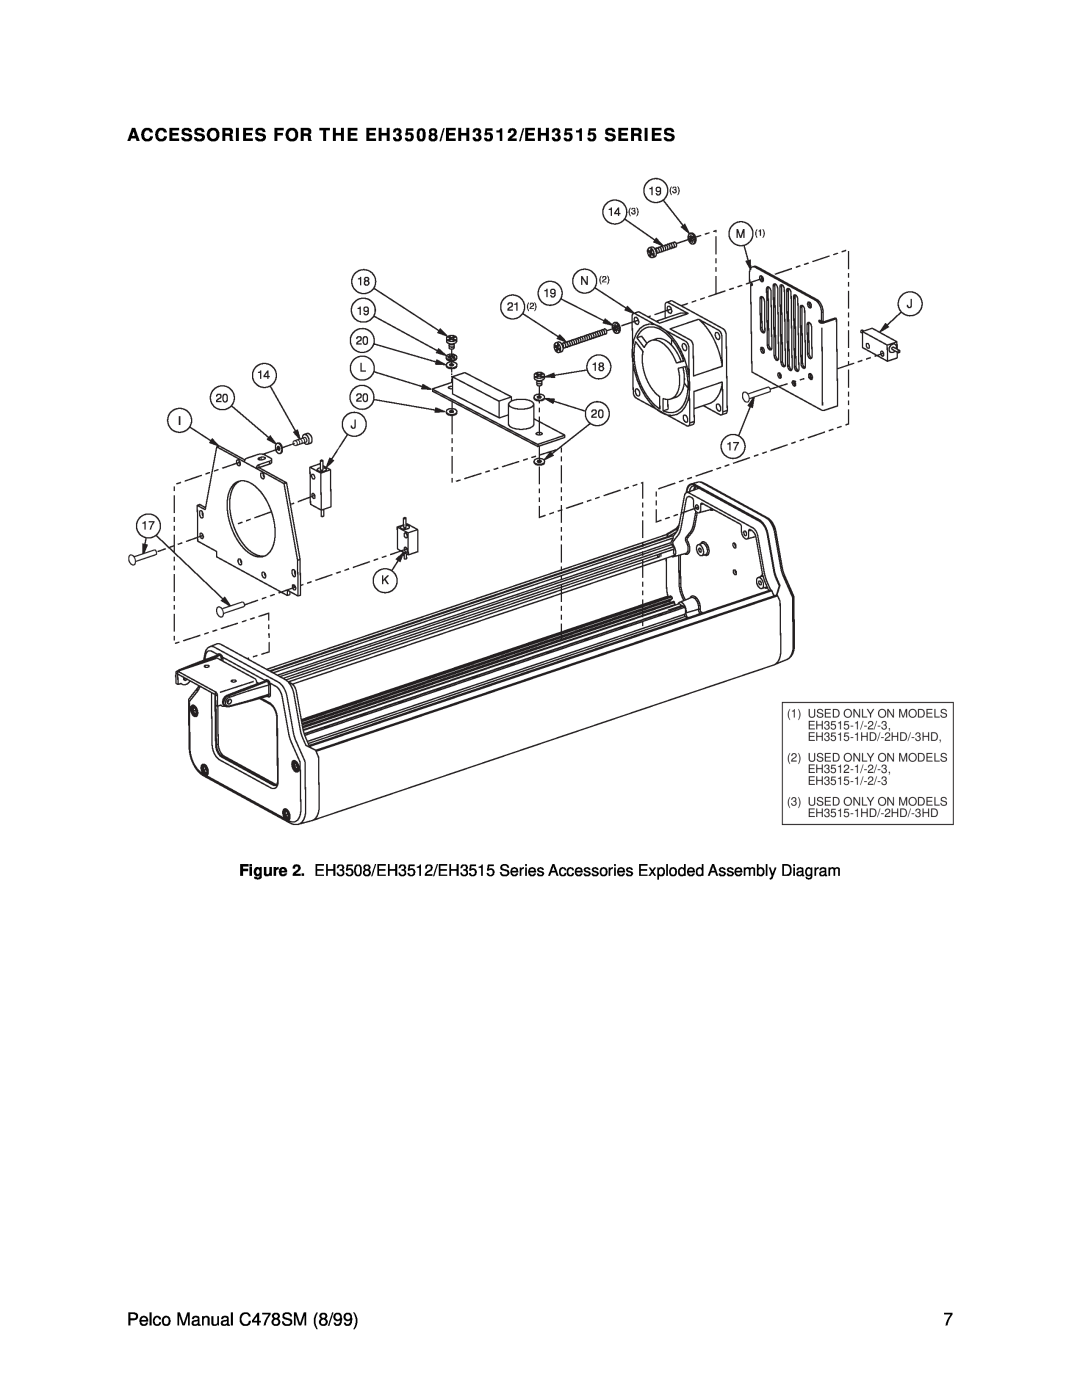 Pelco EH3500 service manual ACCESSORIES FOR THE EH3508/EH3512/EH3515 SERIES, Pelco Manual C478SM 8/99 